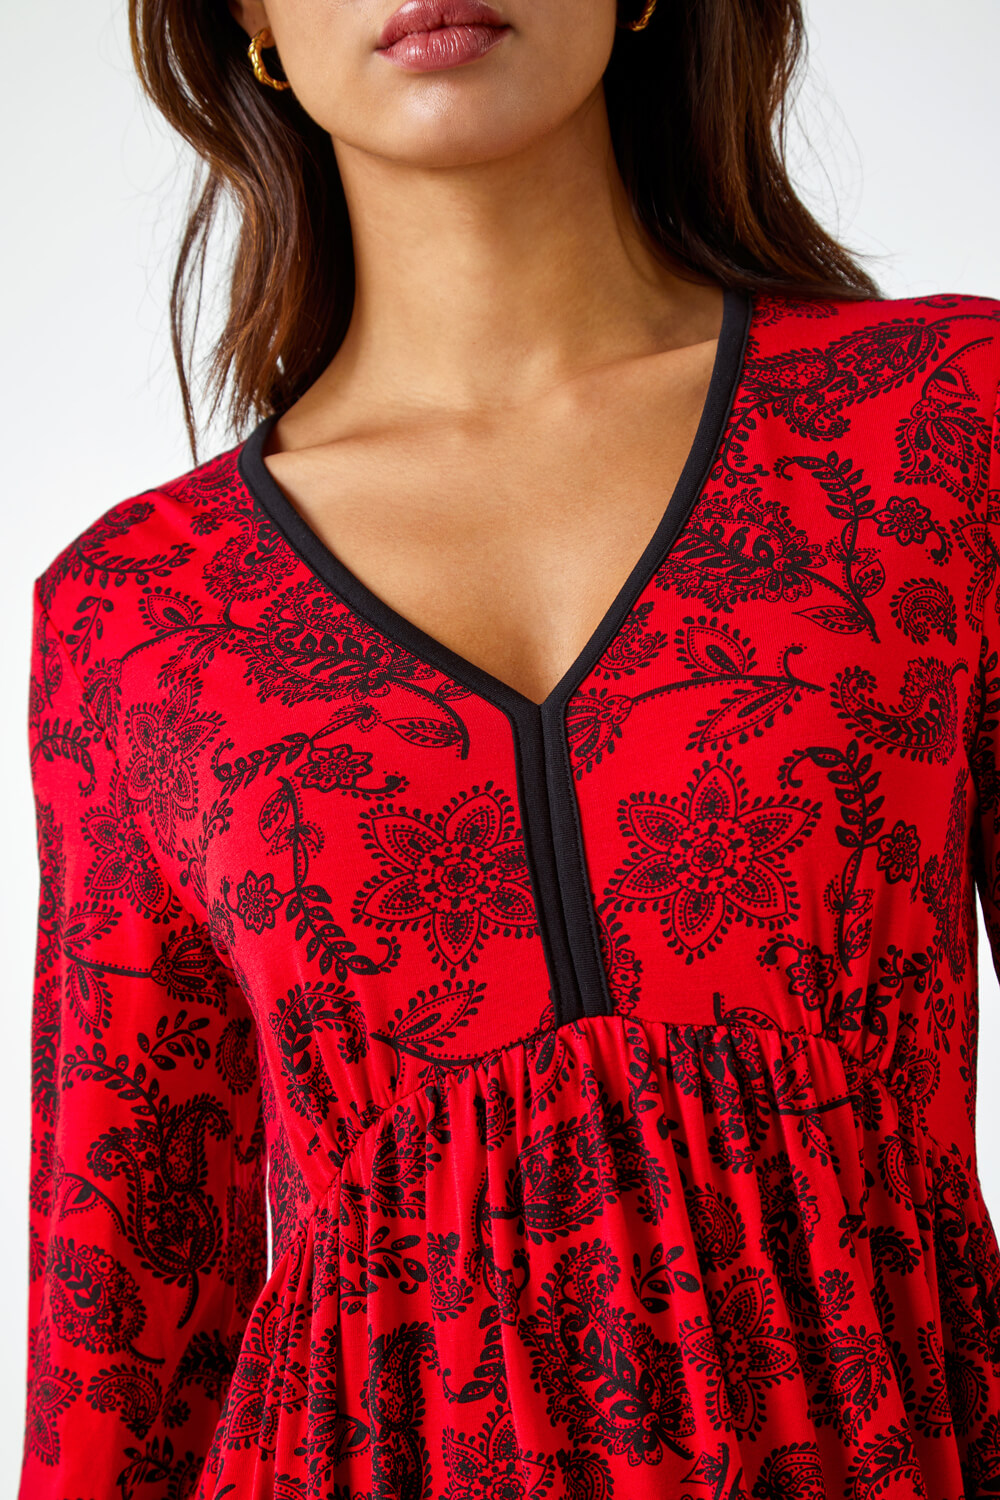 Red Floral Print Stretch Jersey Dress, Image 5 of 5